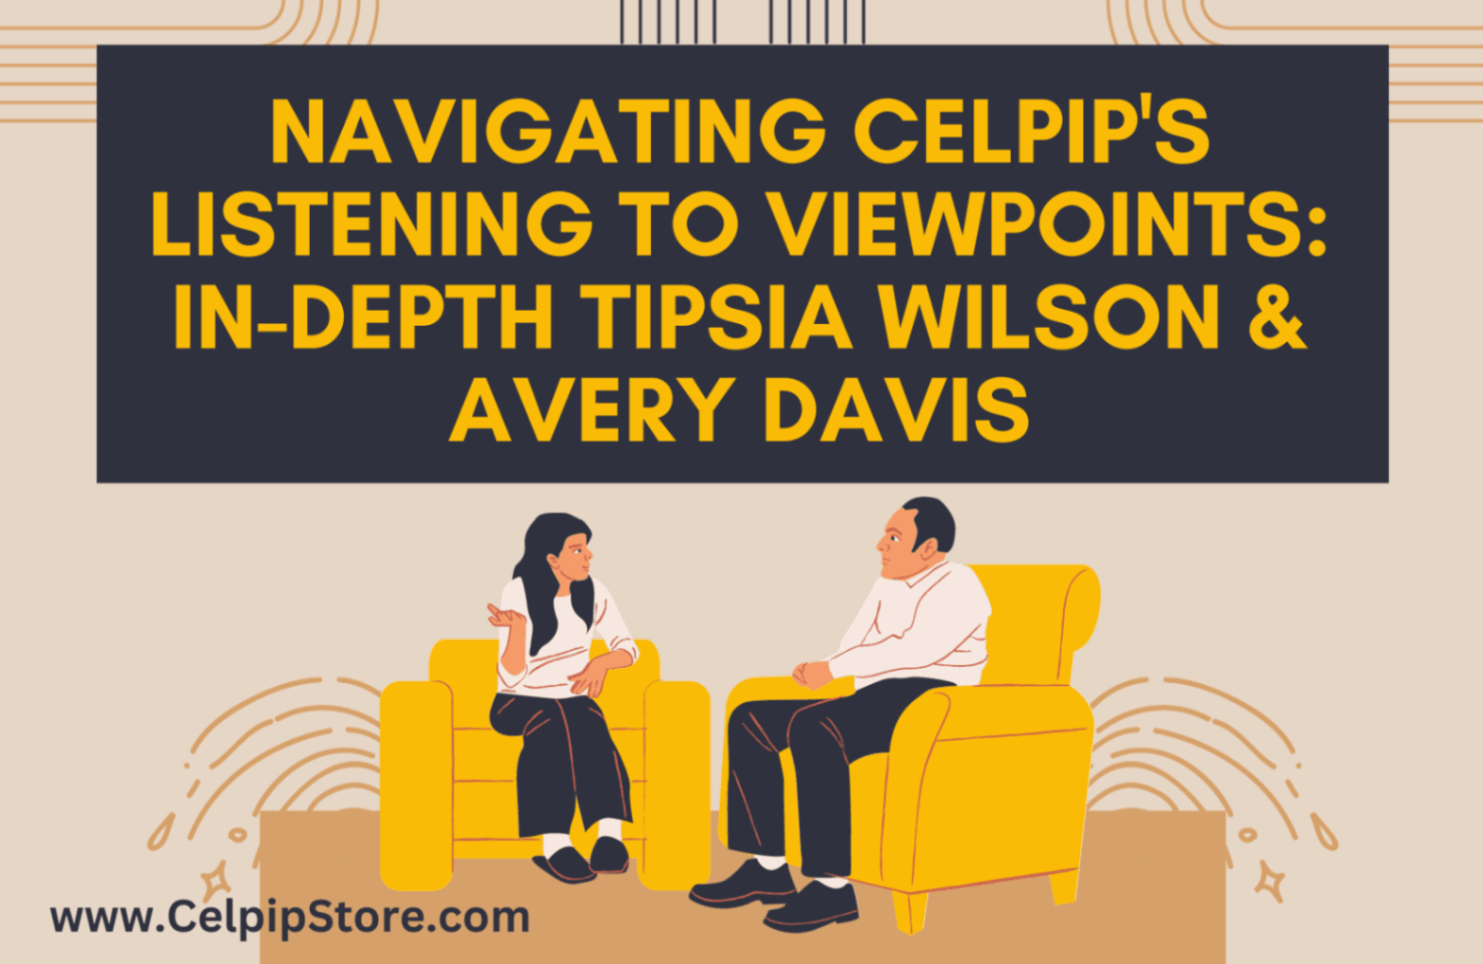 Navigating CELPIP’s Listening to Viewpoints: In-Depth Tips